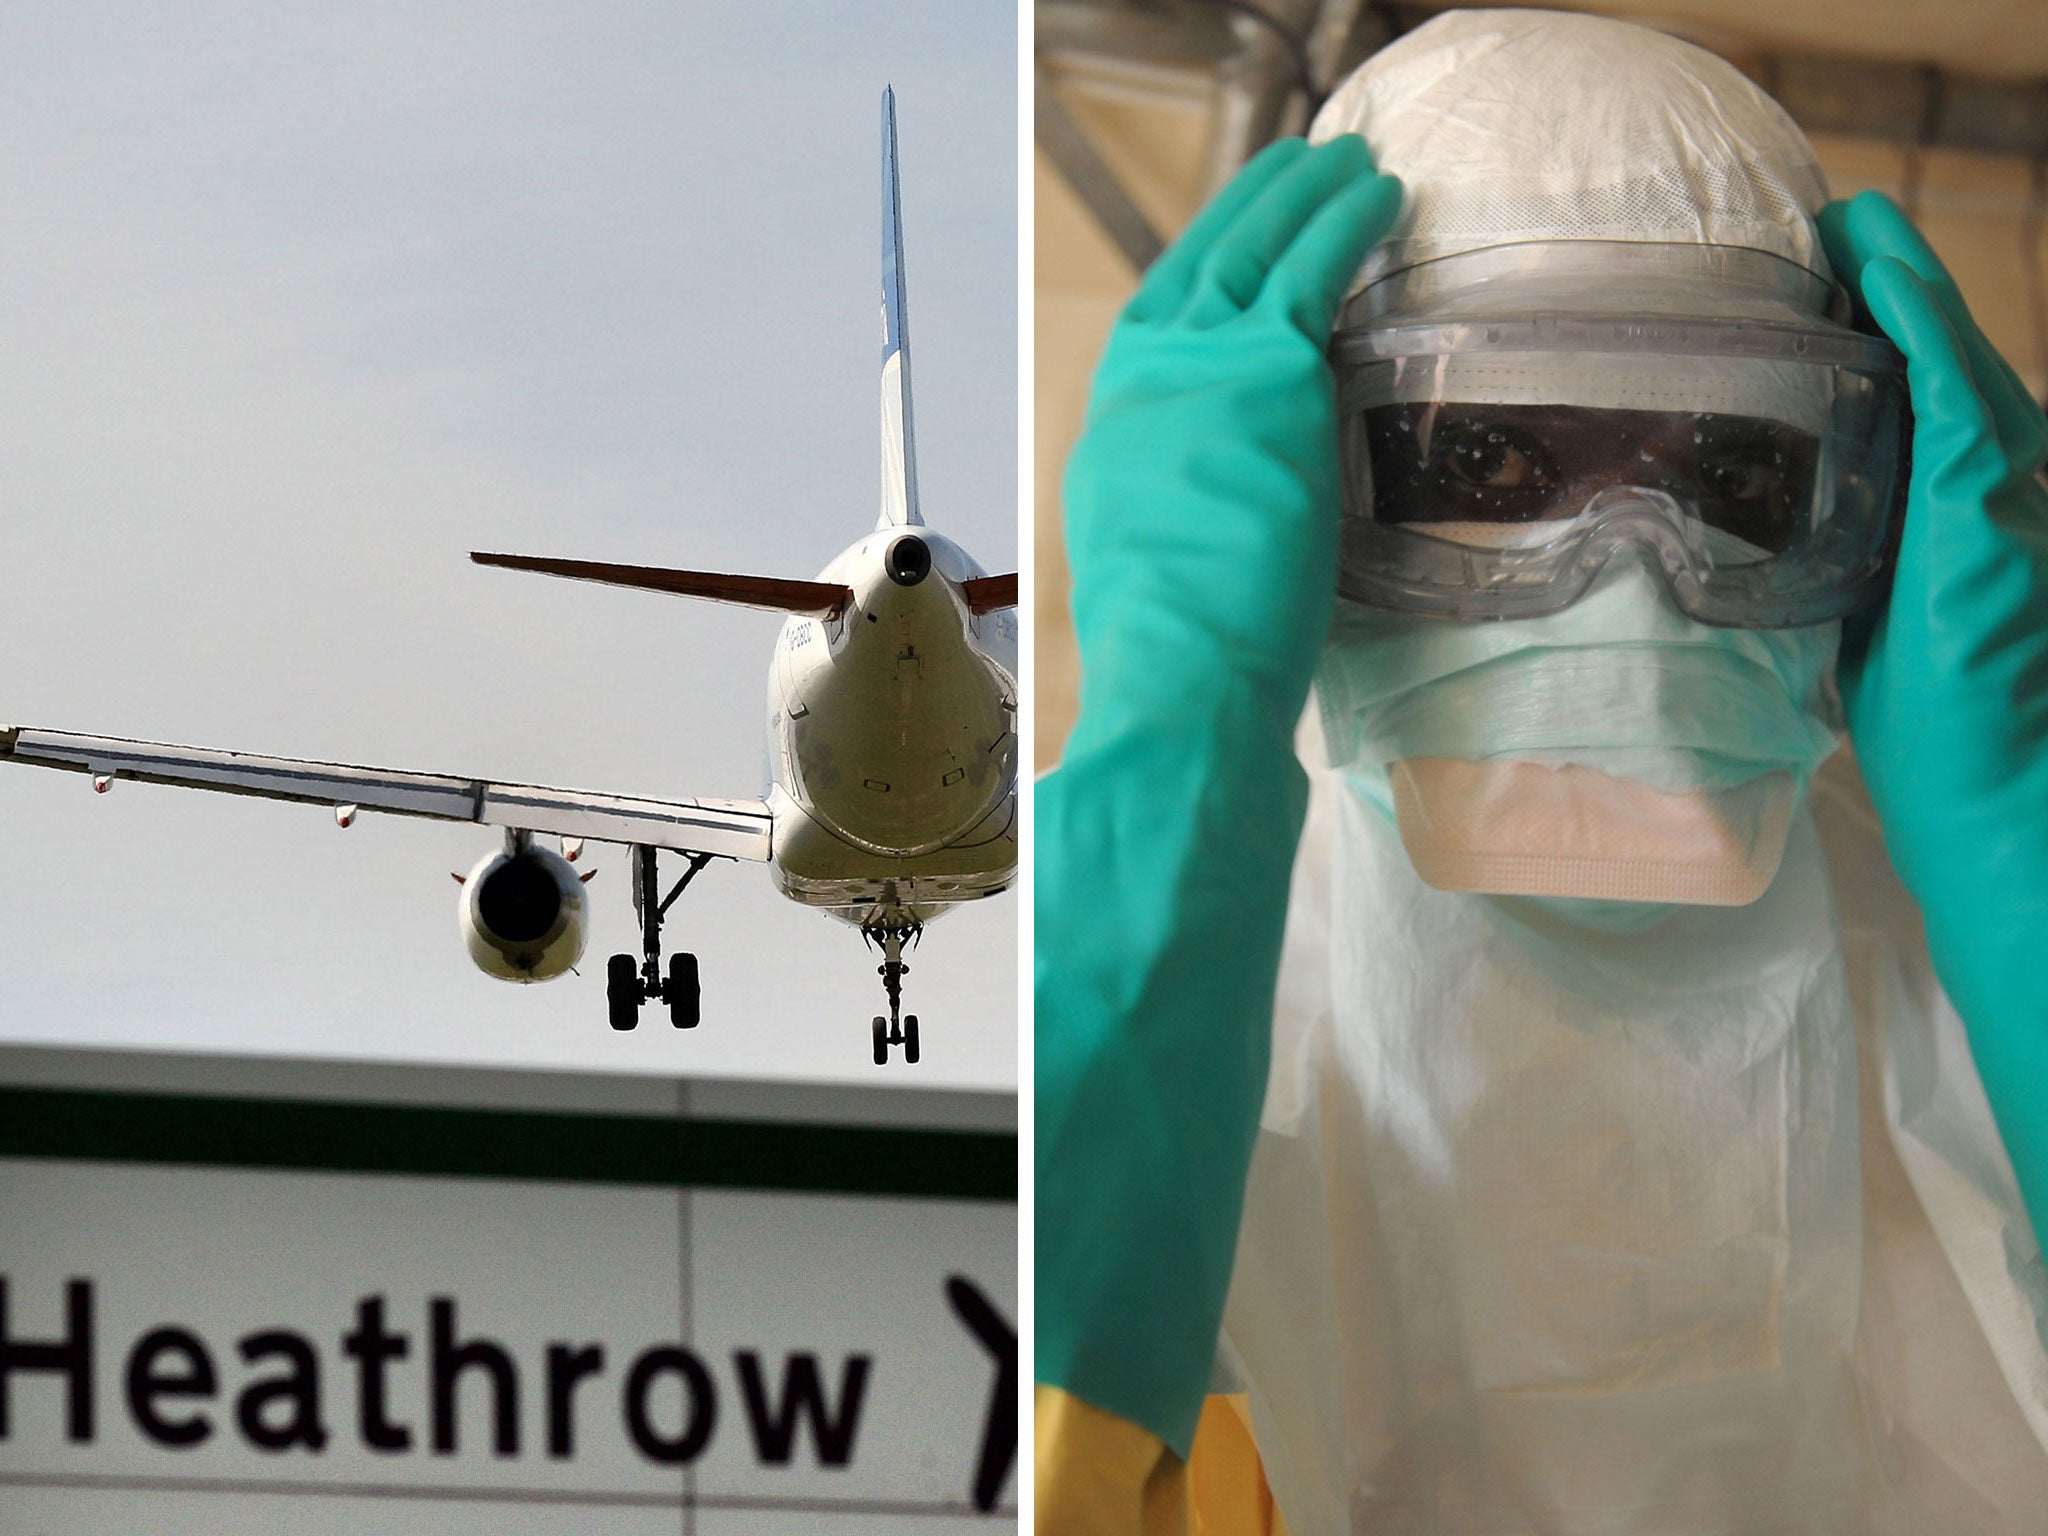 Public Health England has contacted UK doctors to warn them to look out for signs of Ebola arriving in Britain